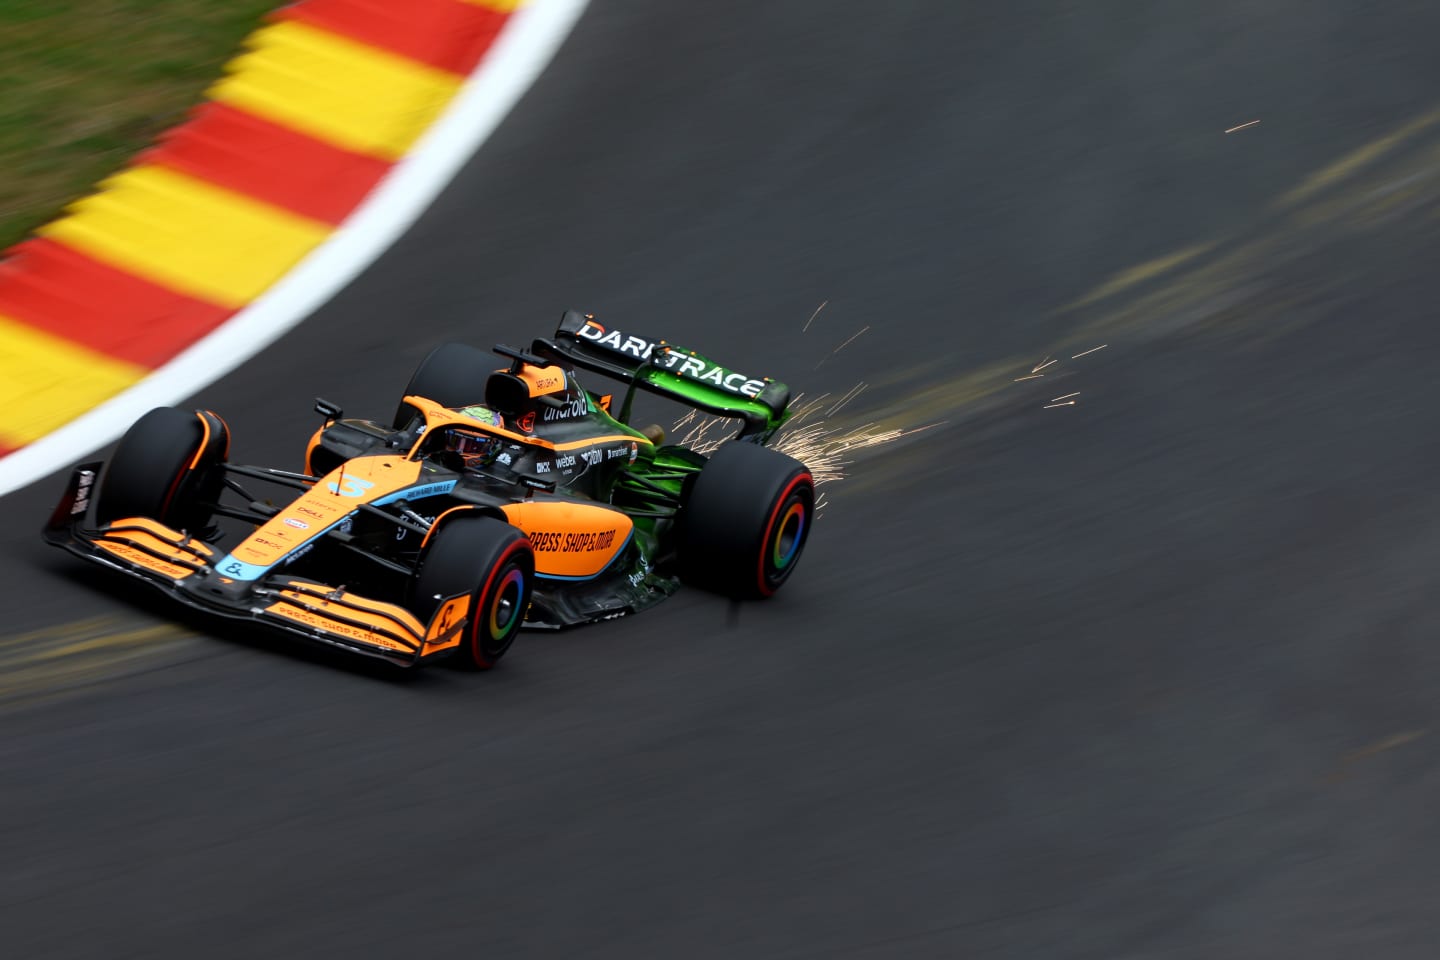 SPA, BELGIUM - AUGUST 27: Daniel Ricciardo of Australia driving the (3) McLaren MCL36 Mercedes on track during final practice ahead of the F1 Grand Prix of Belgium at Circuit de Spa-Francorchamps on August 27, 2022 in Spa, Belgium. (Photo by Mark Thompson/Getty Images)